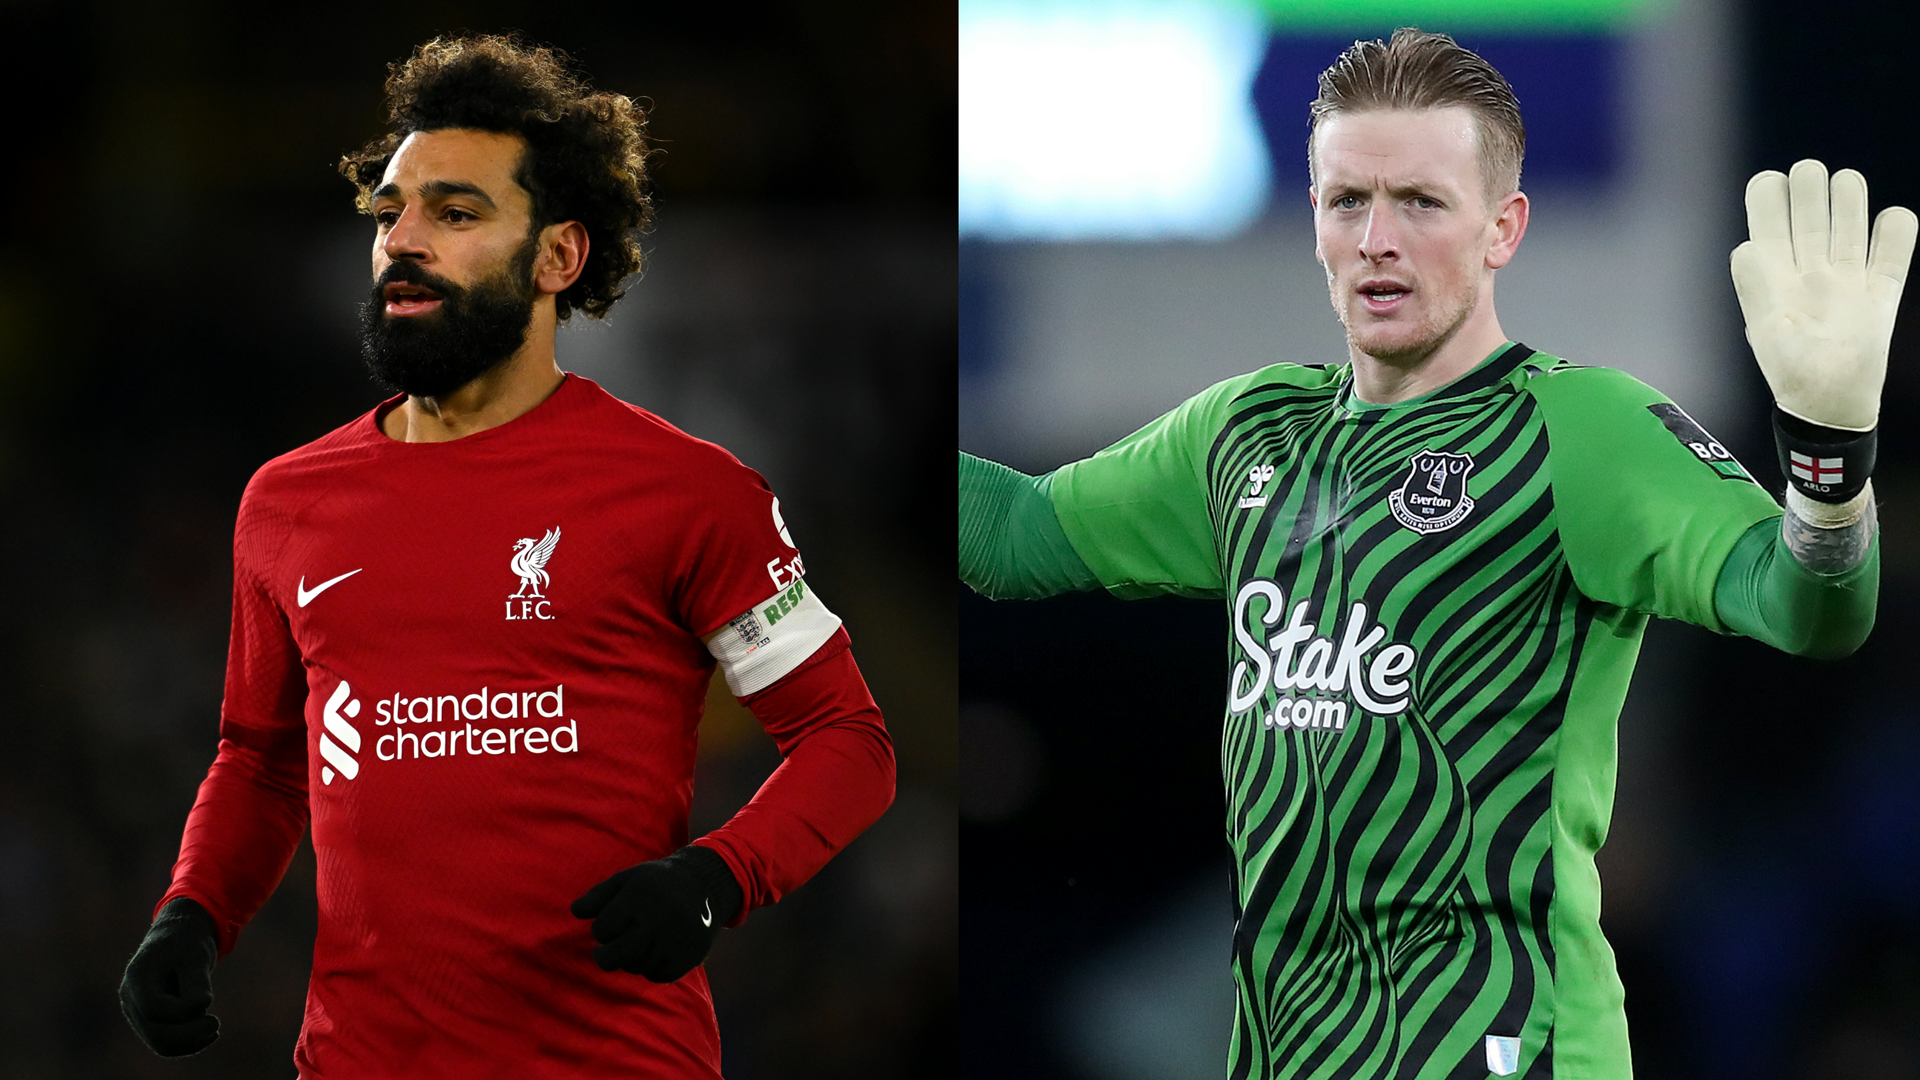 Liverpool vs Everton Live stream, TV channel, kick-off time and where to watch Merseyside derby Goal US